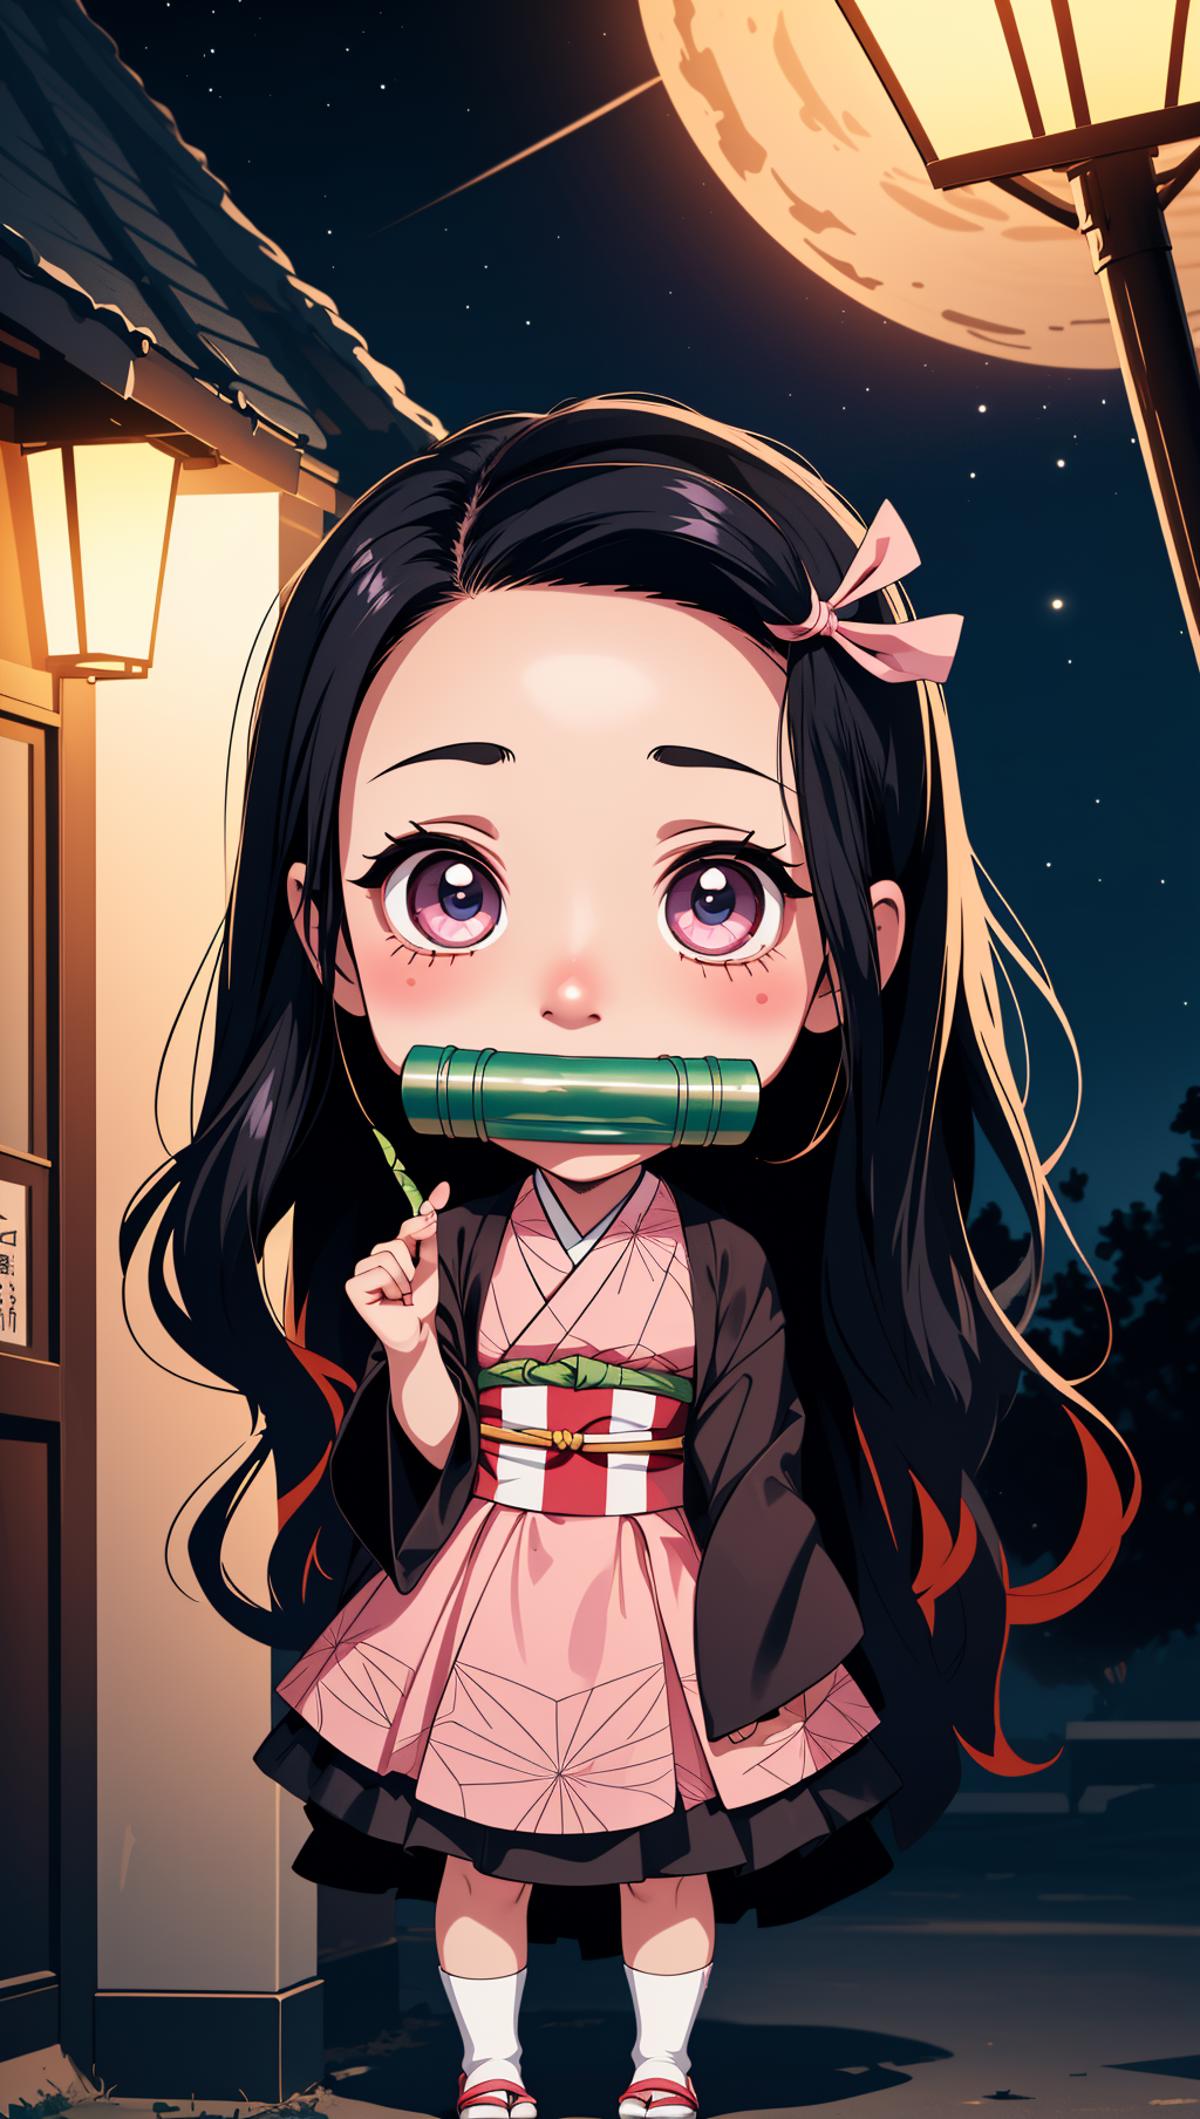 A cartoon image of a girl with black hair holding a green candy bar.